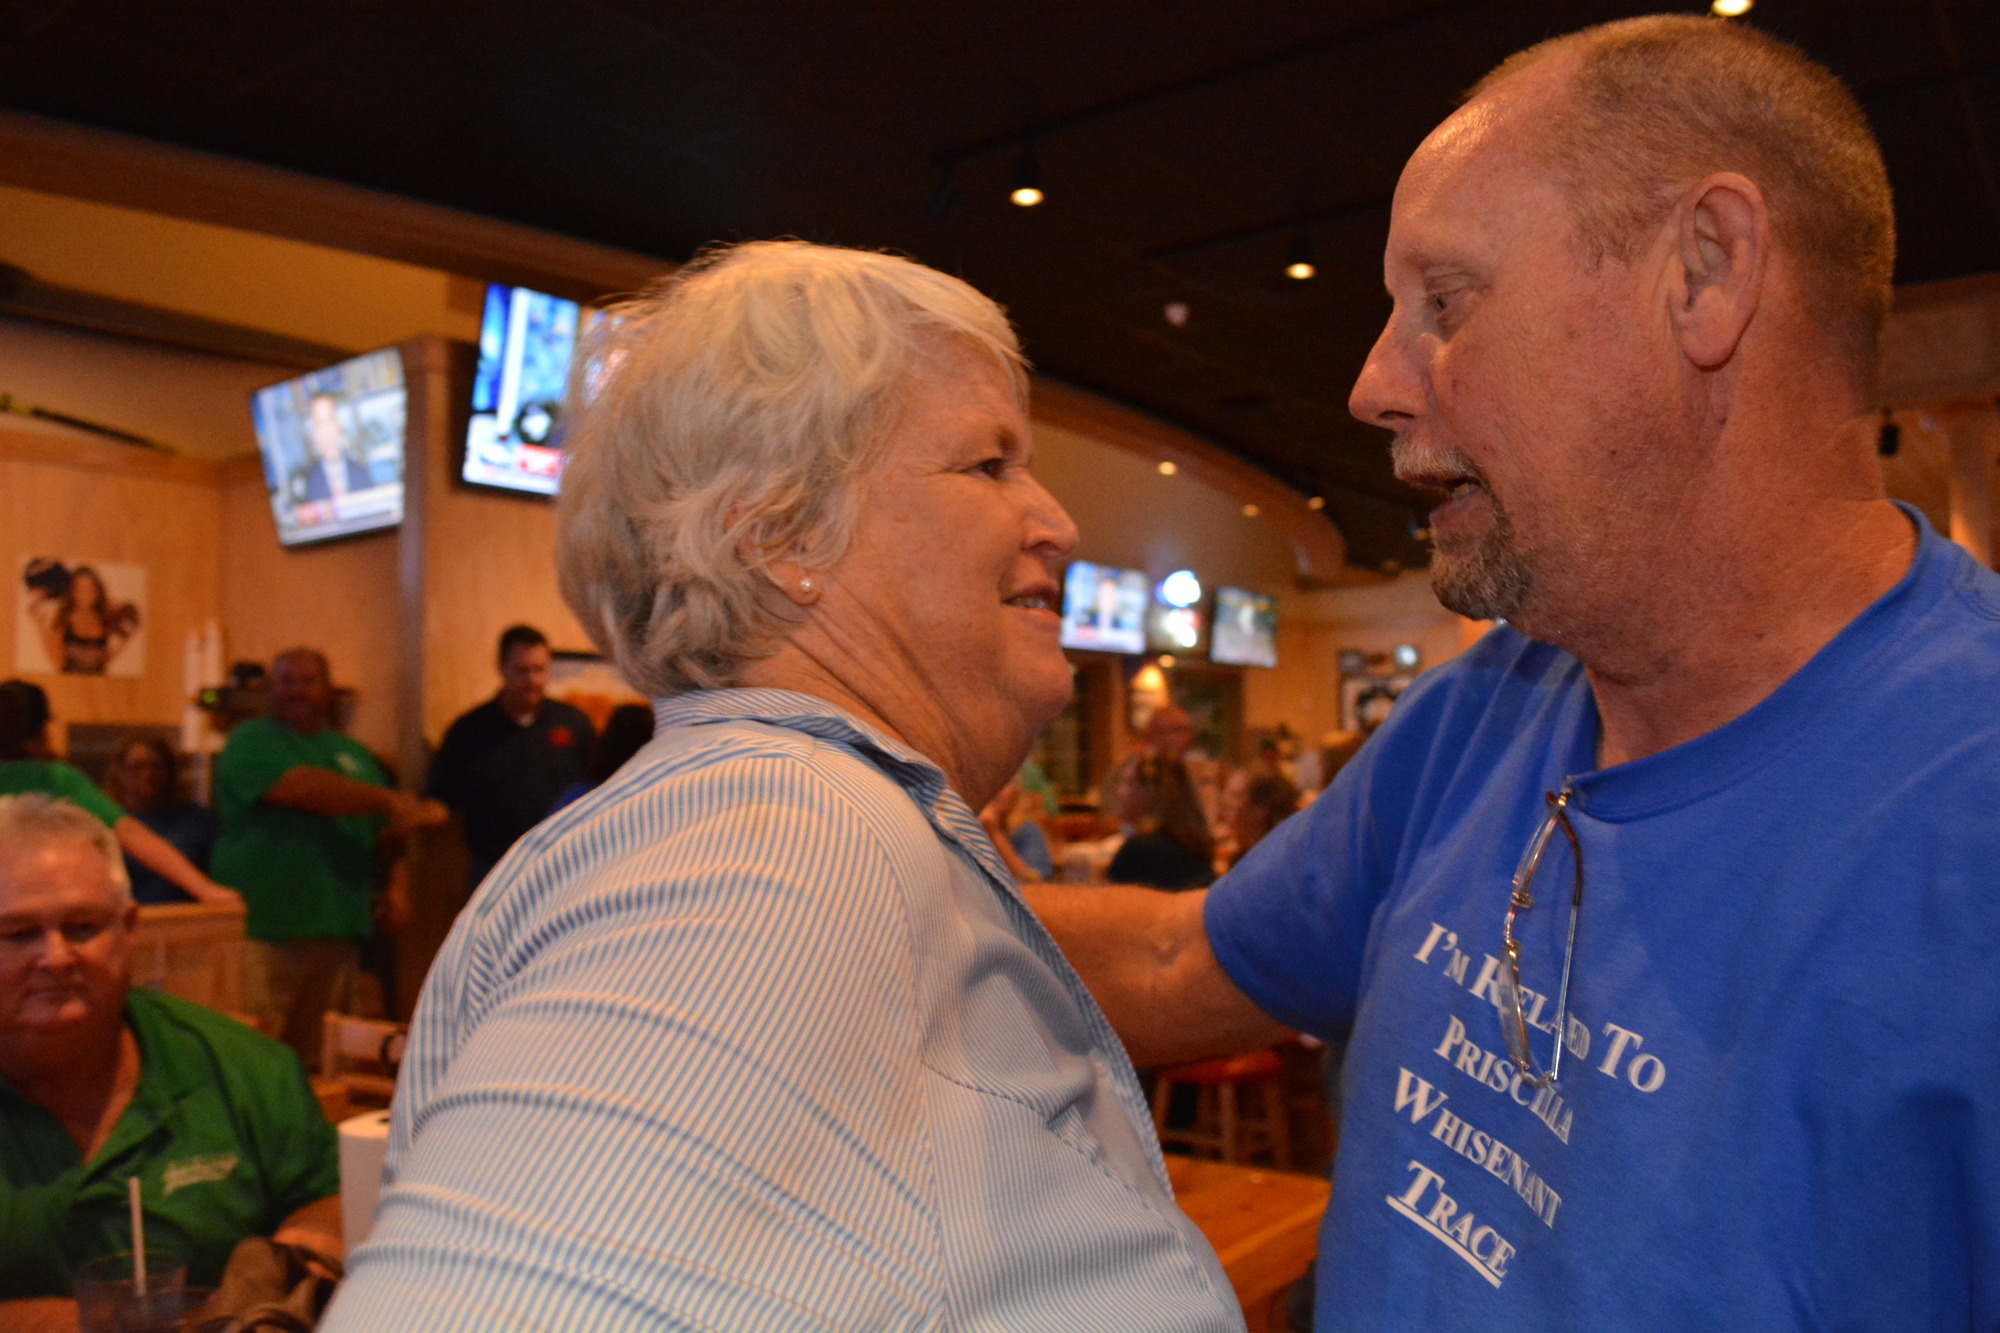 Priscilla Whisenant Trace receives congratulations from Rick Wood after winning the District 1 commissioner's Republican Primary.